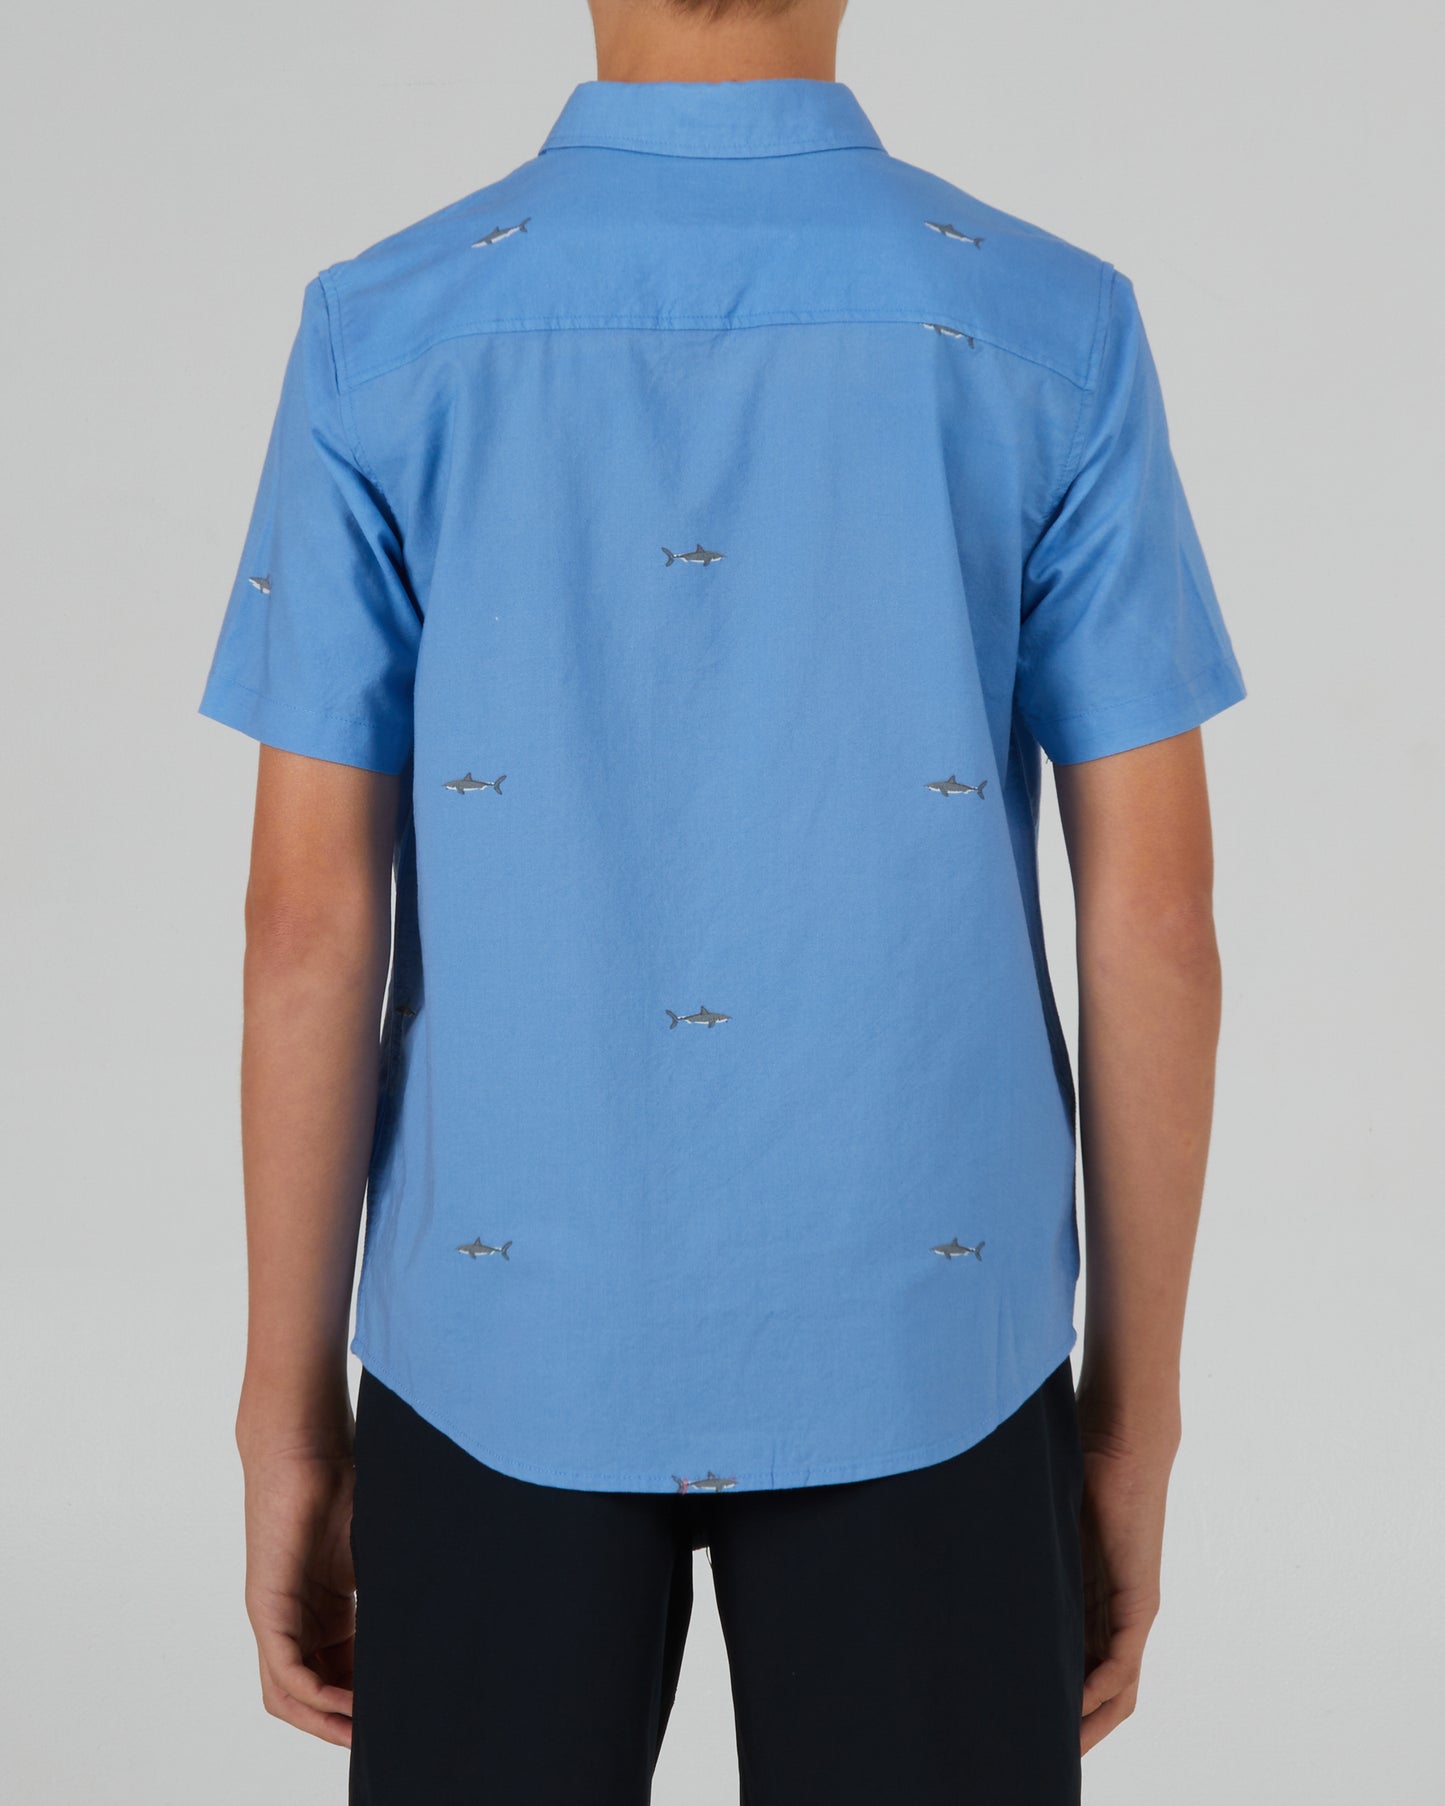 back view of Seaside Boys Marine Blue S/S Woven